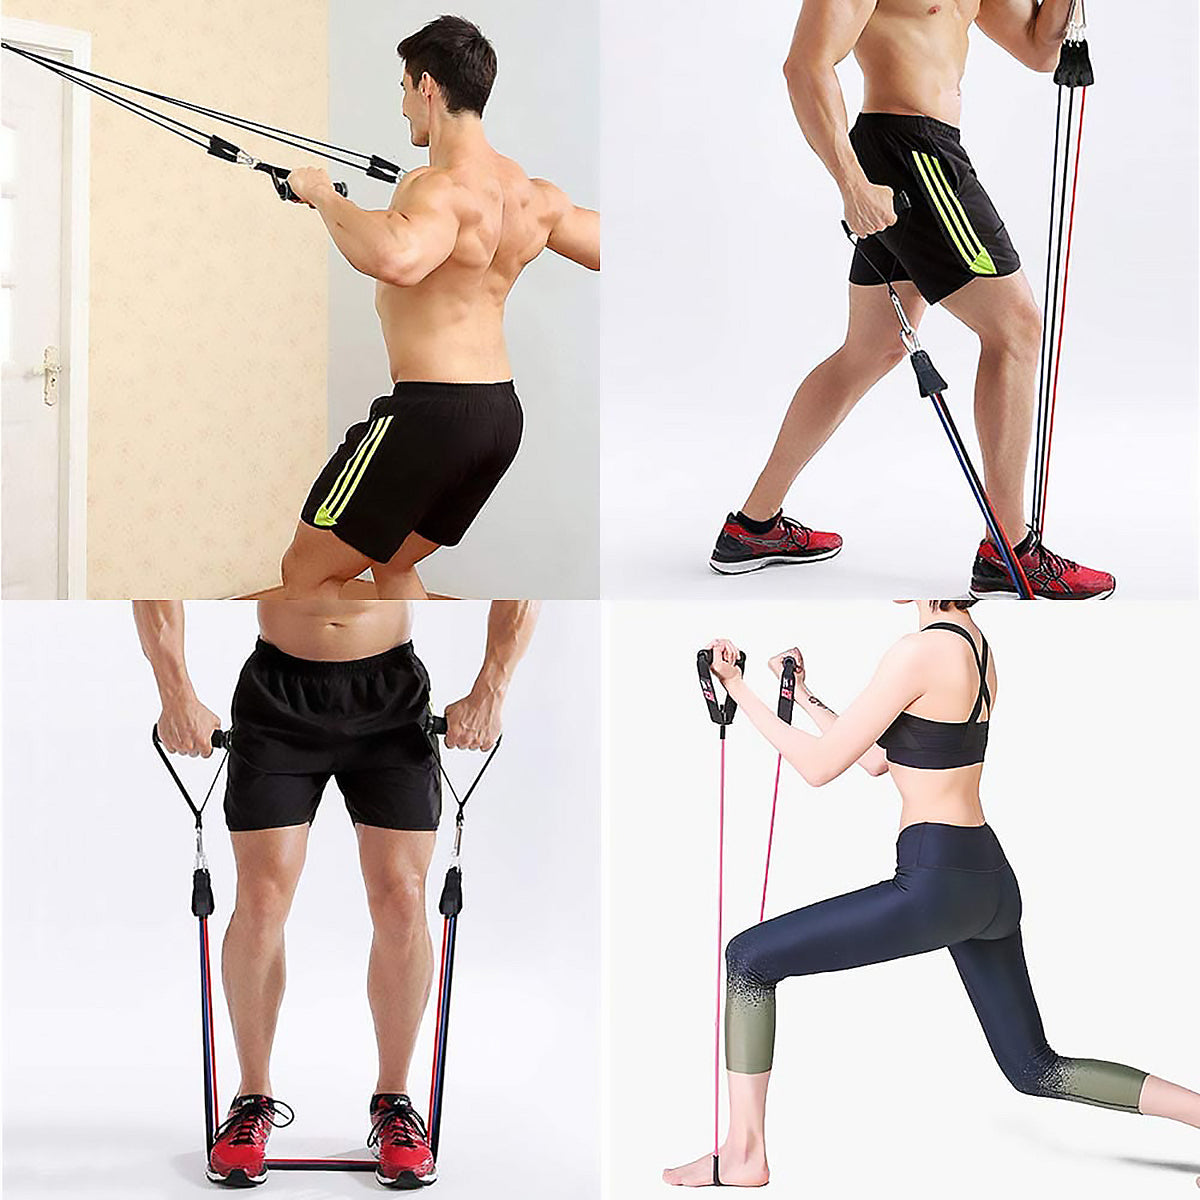 Example of 4 exercises with resistance tube bands.